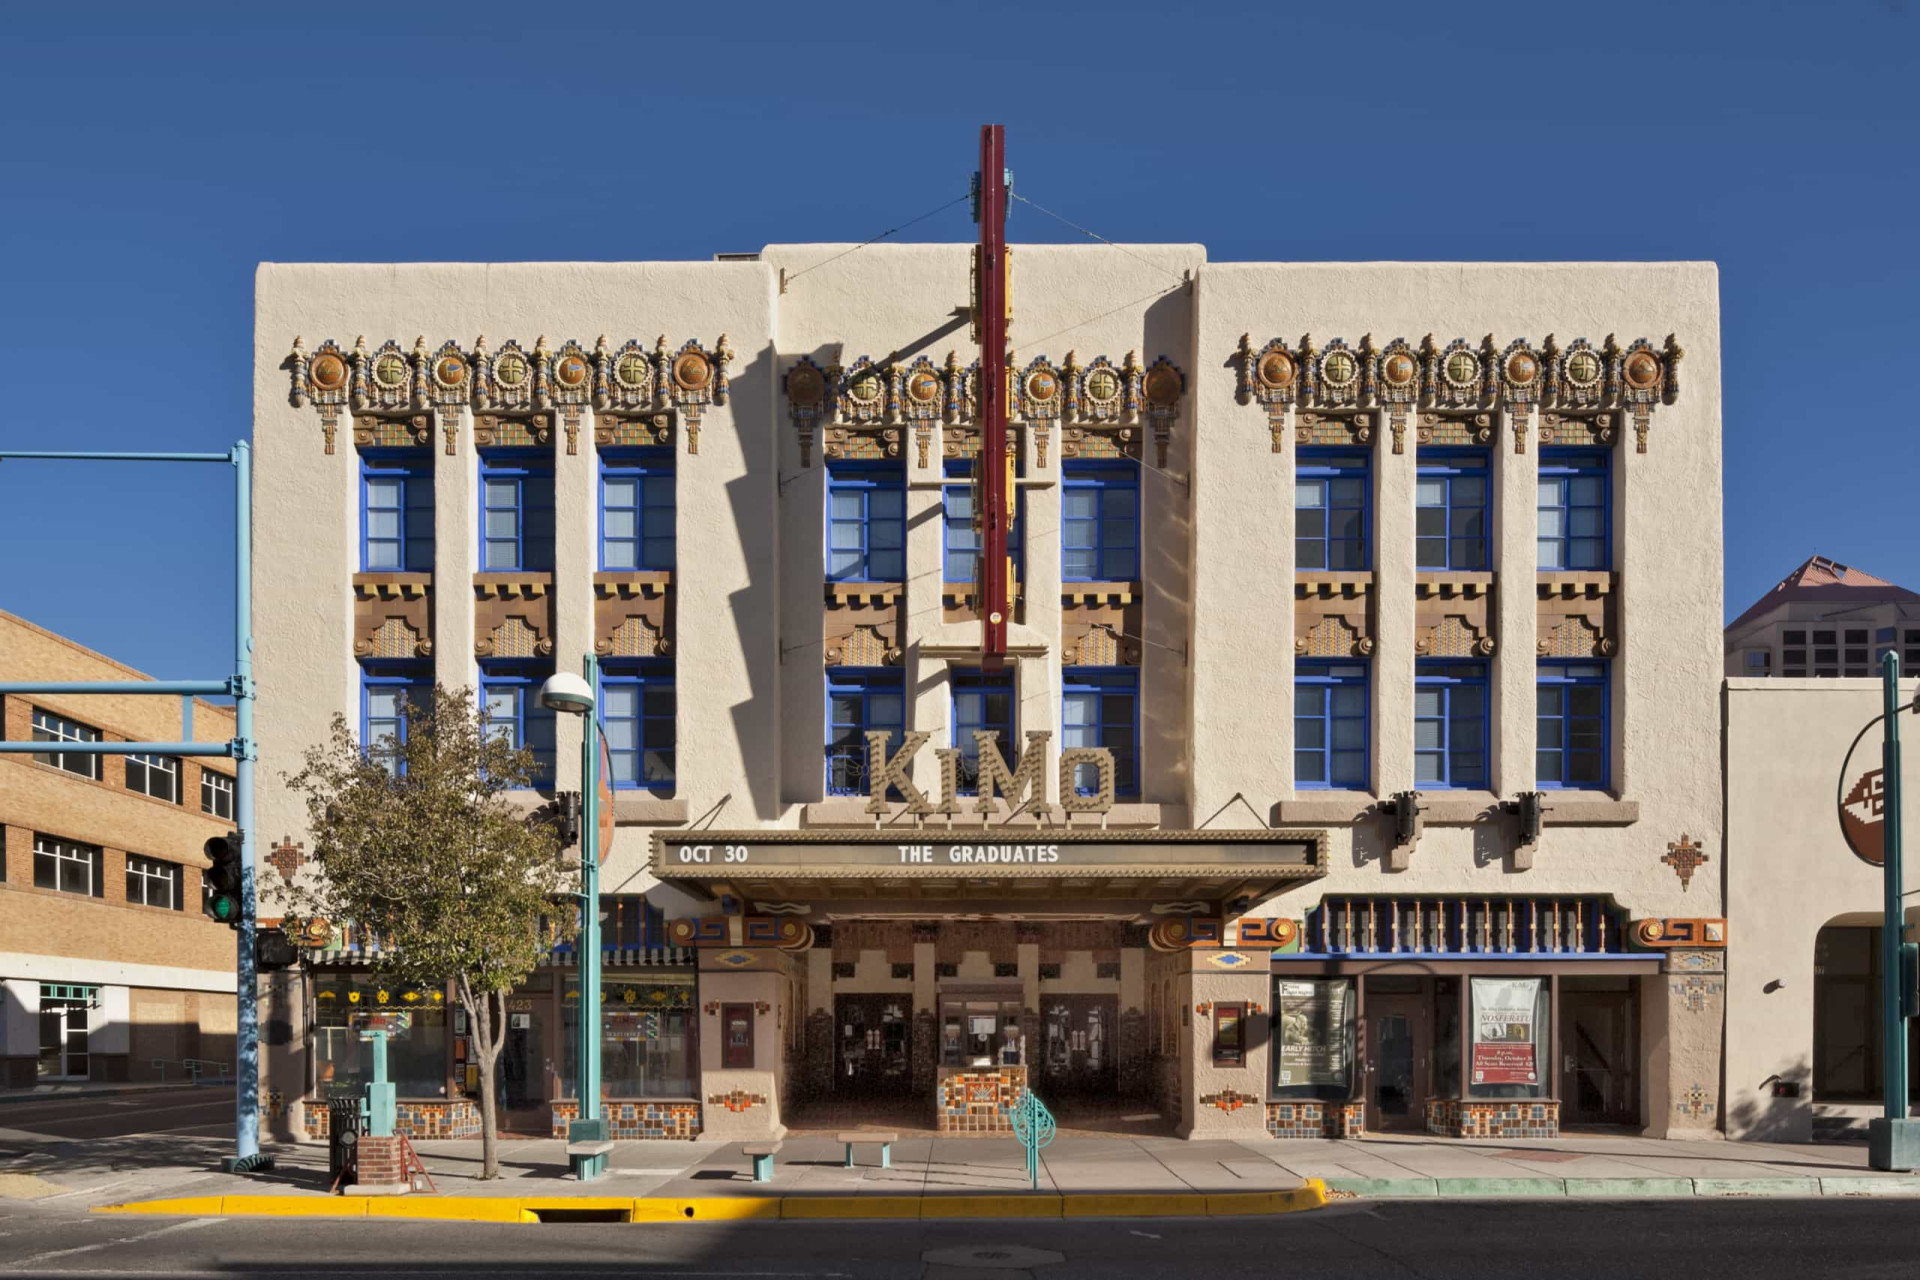 <p>Albuquerque's Kimo Theatre on Central Avenue is a fantastic example of extravagant Art Deco-Pueblo Revival Style architecture. Opened in 1927, the venue overlooks the famous Route 66, the legendary "Mother Road" that arrows through the city on its way to the West Coast.</p><p>You may also like:<a href="https://www.starsinsider.com/n/456350?utm_source=msn.com&utm_medium=display&utm_campaign=referral_description&utm_content=487164v6en-en"> Actors who always make a bad movie better</a></p>